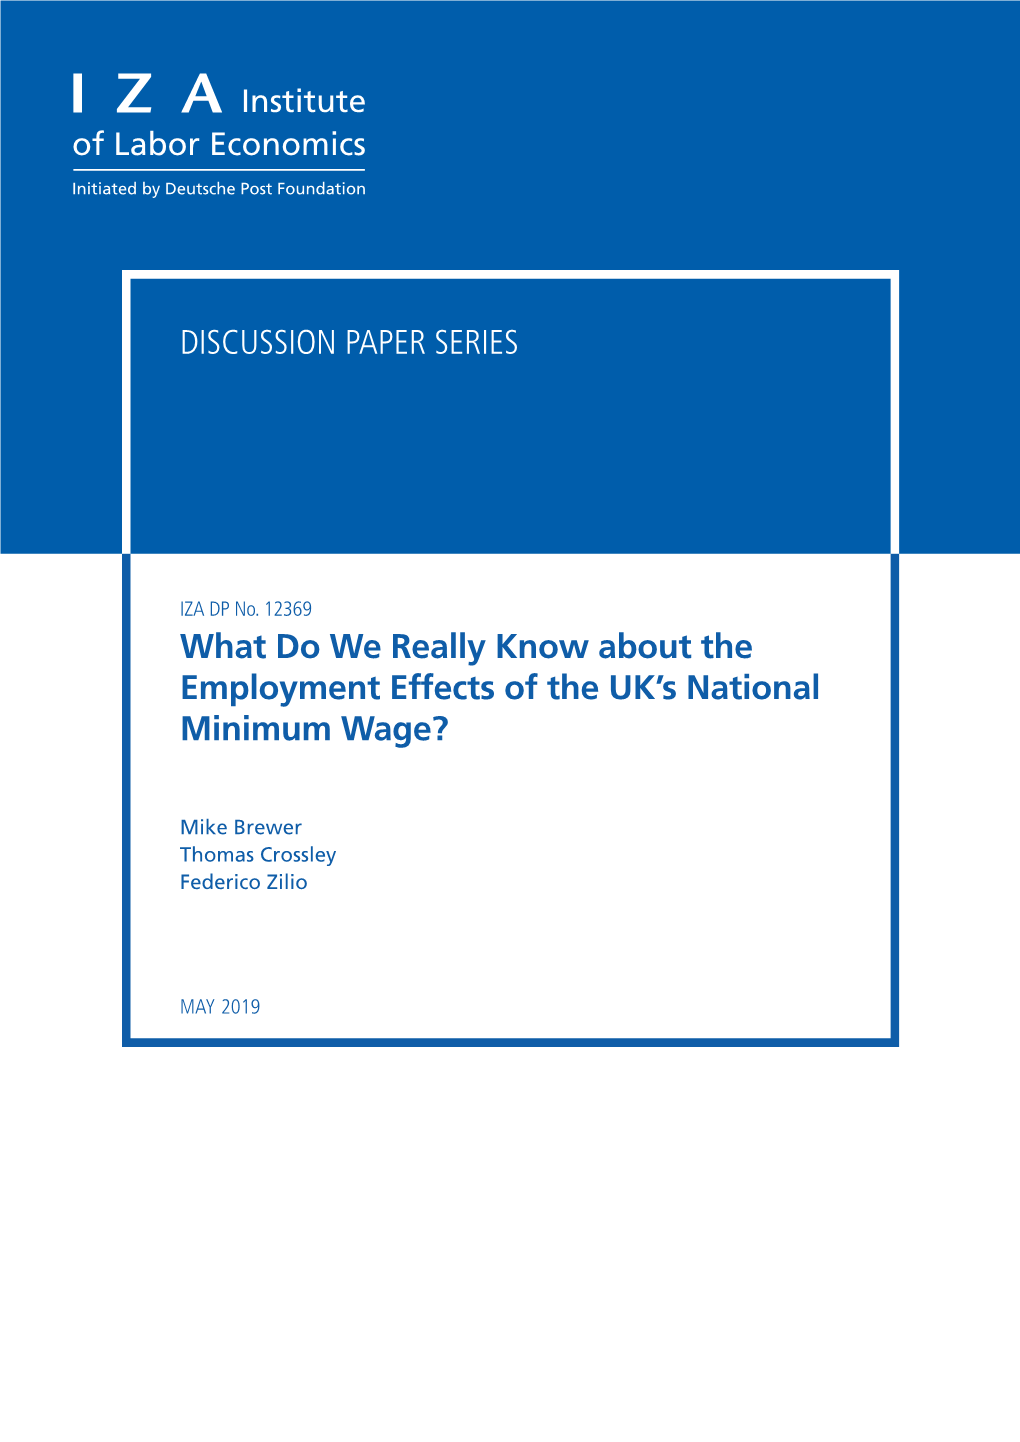 What Do We Really Know About the Employment Effects of the UK's